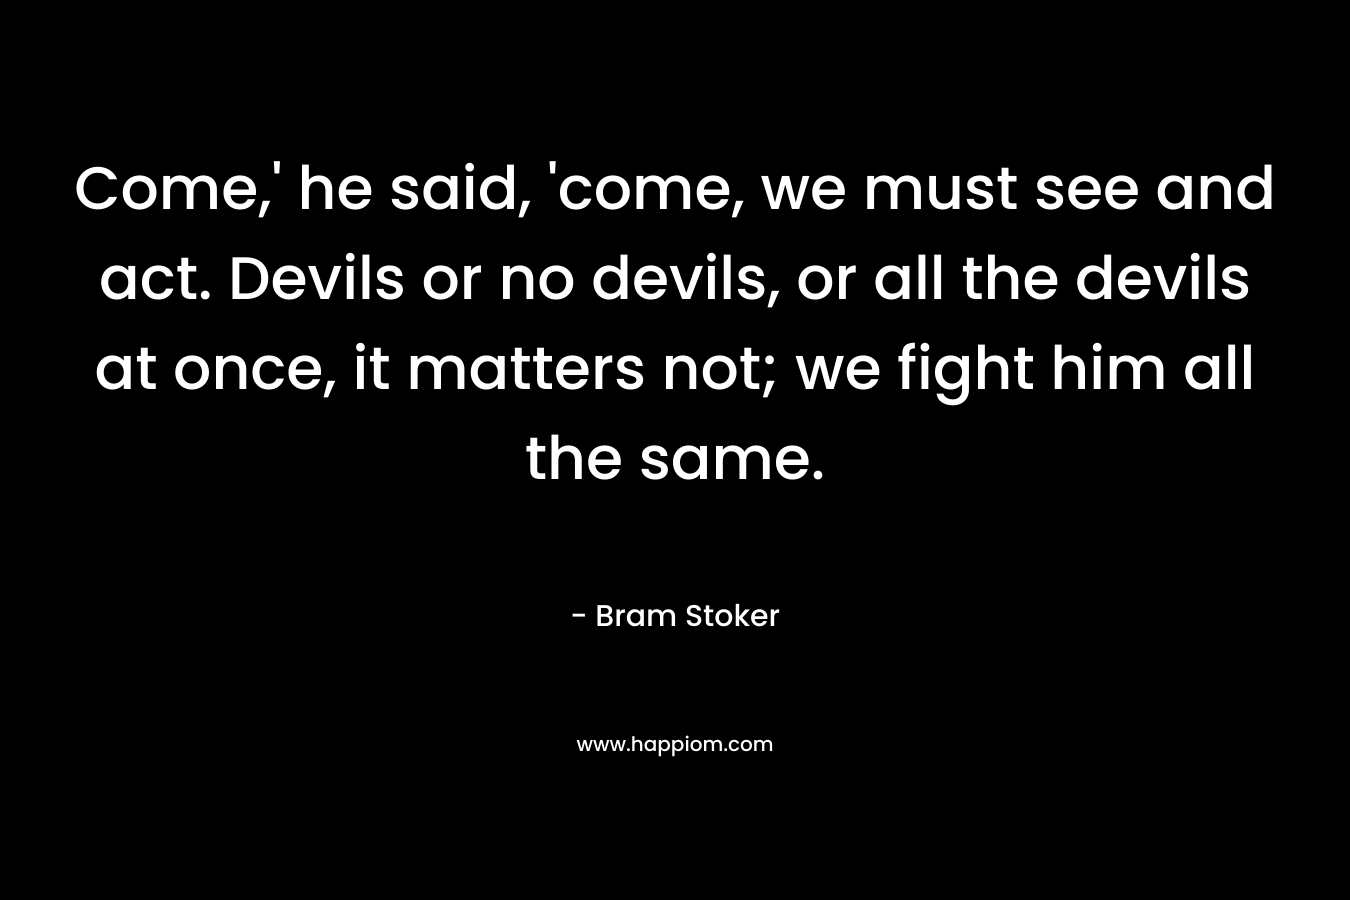 Come,’ he said, ‘come, we must see and act. Devils or no devils, or all the devils at once, it matters not; we fight him all the same. – Bram Stoker